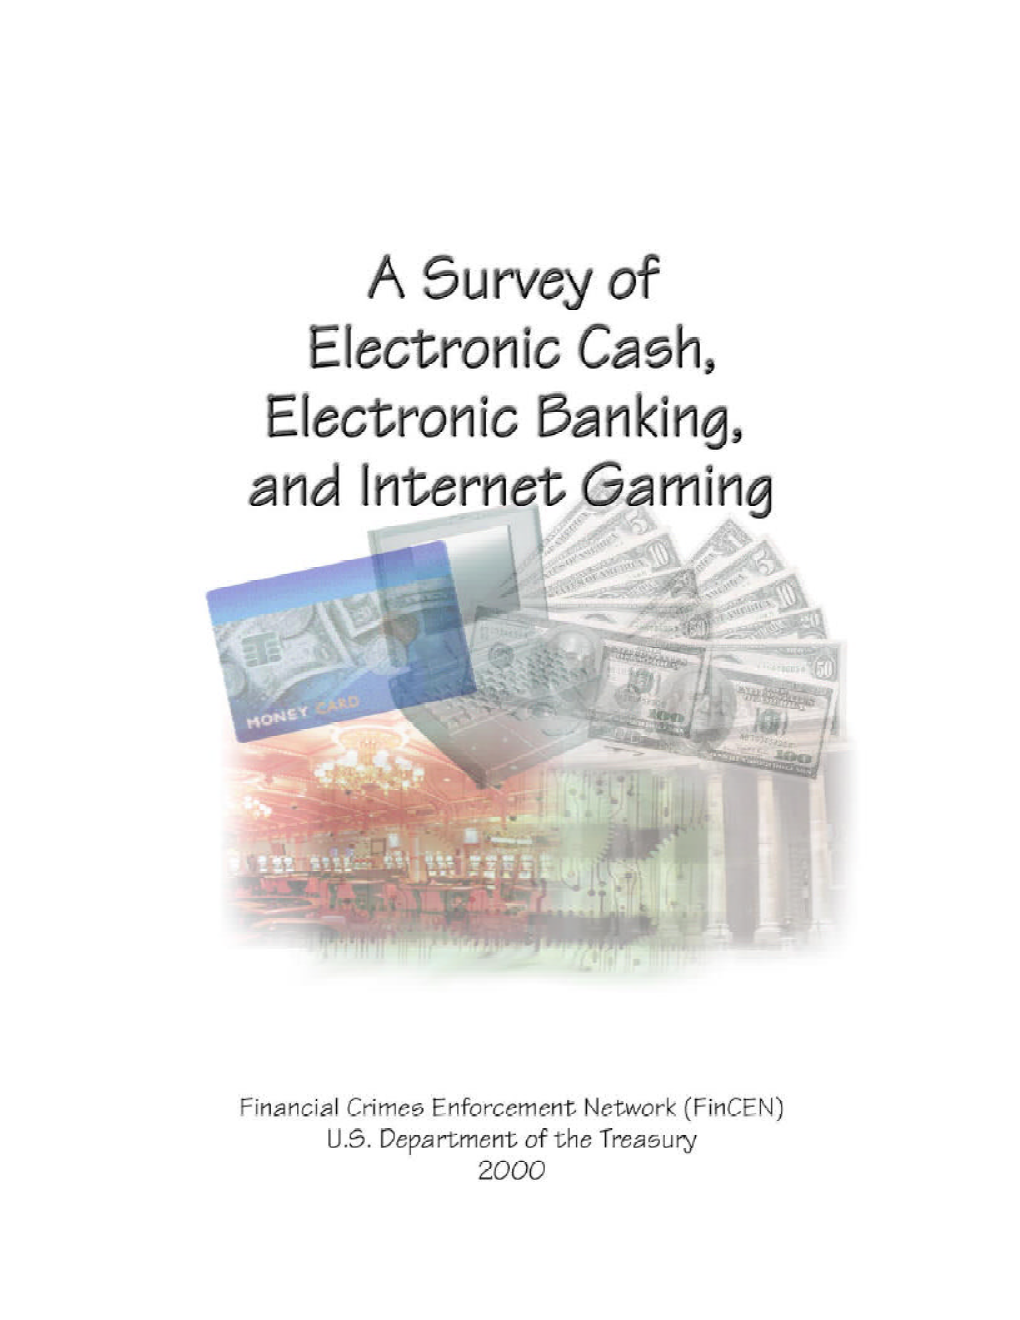 Survey of Electronic Cash, Electronic Banking, and Internet Gaming